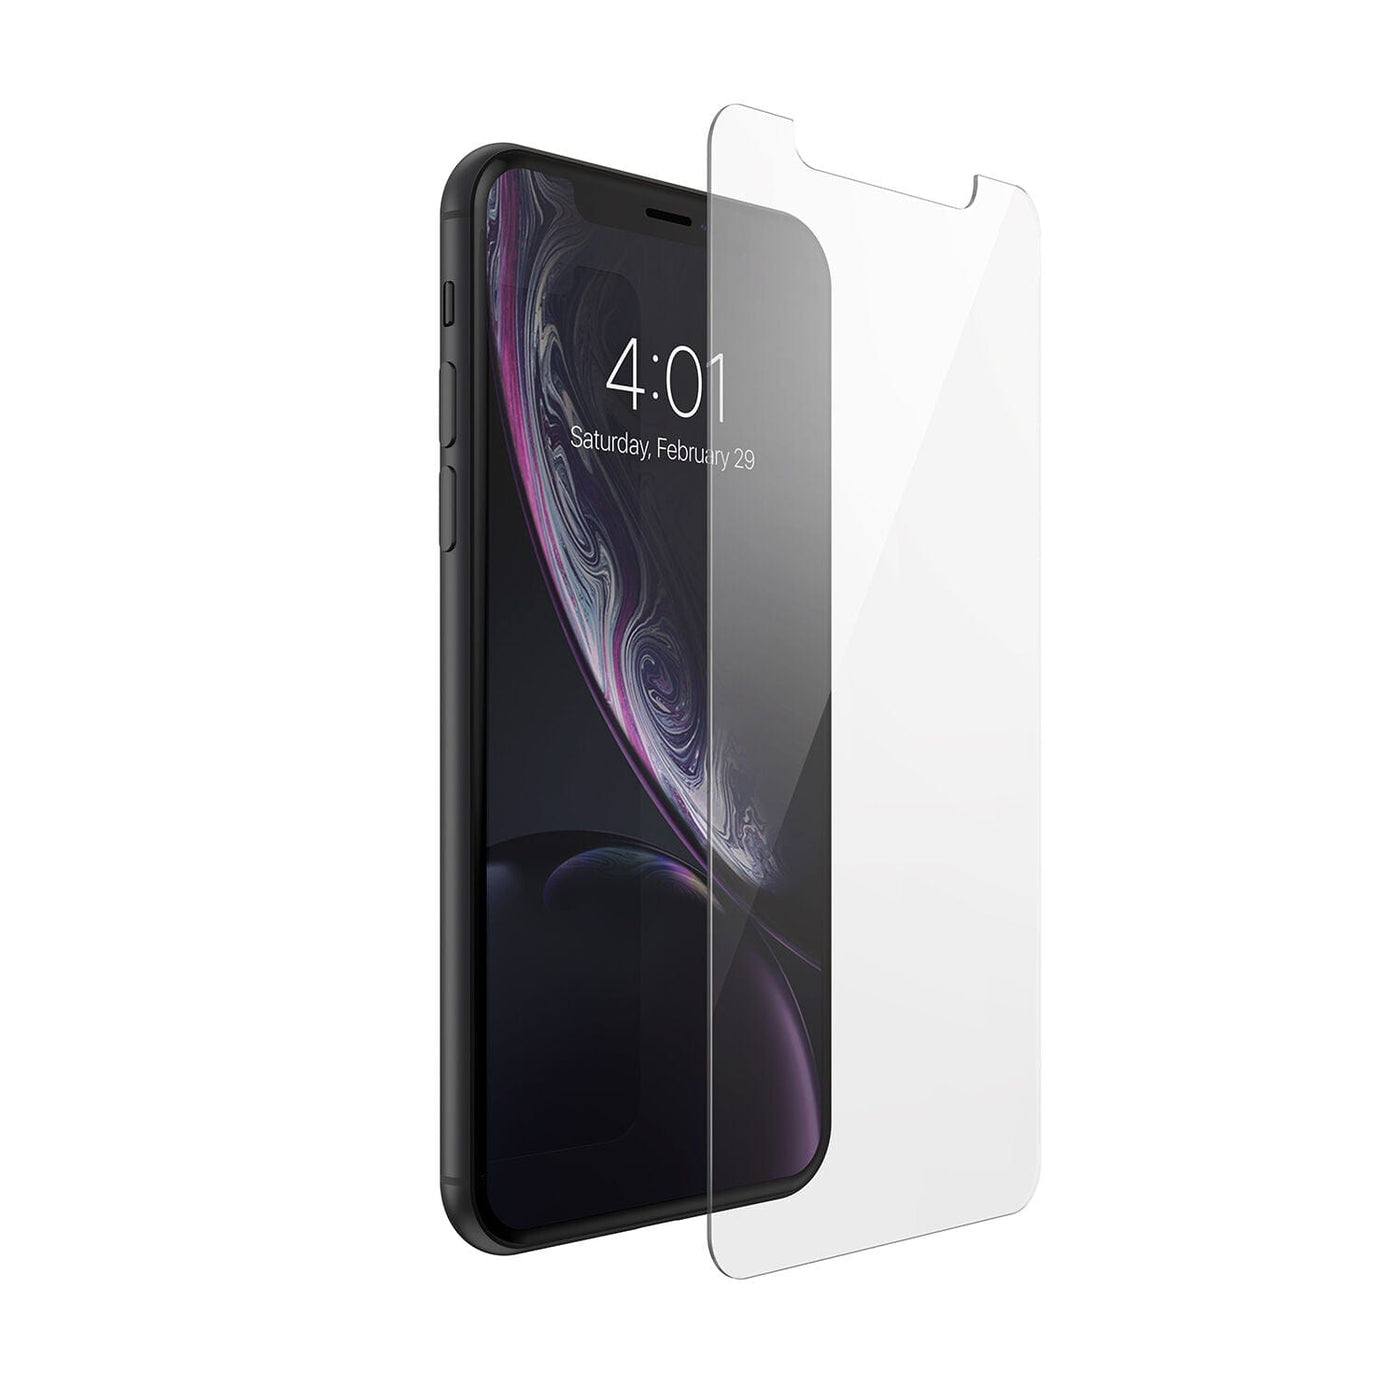 AT&T Tempered Glass Screen Protector - iPhone 11/XR Clear from AT&T